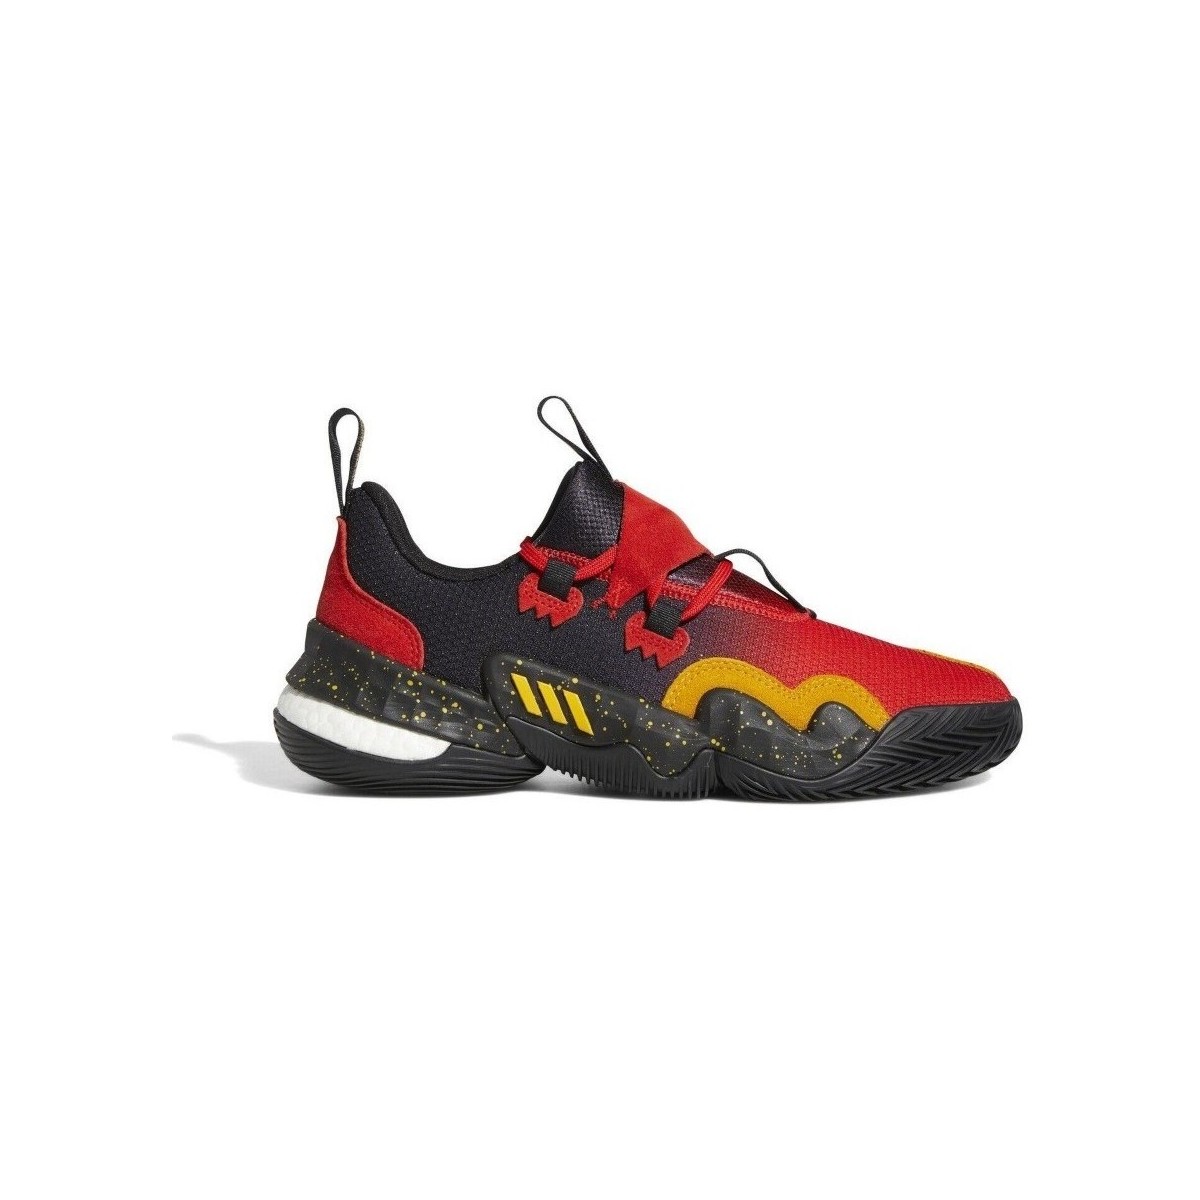 Chaussures Basketball adidas Originals Trae Young 1 Rouge